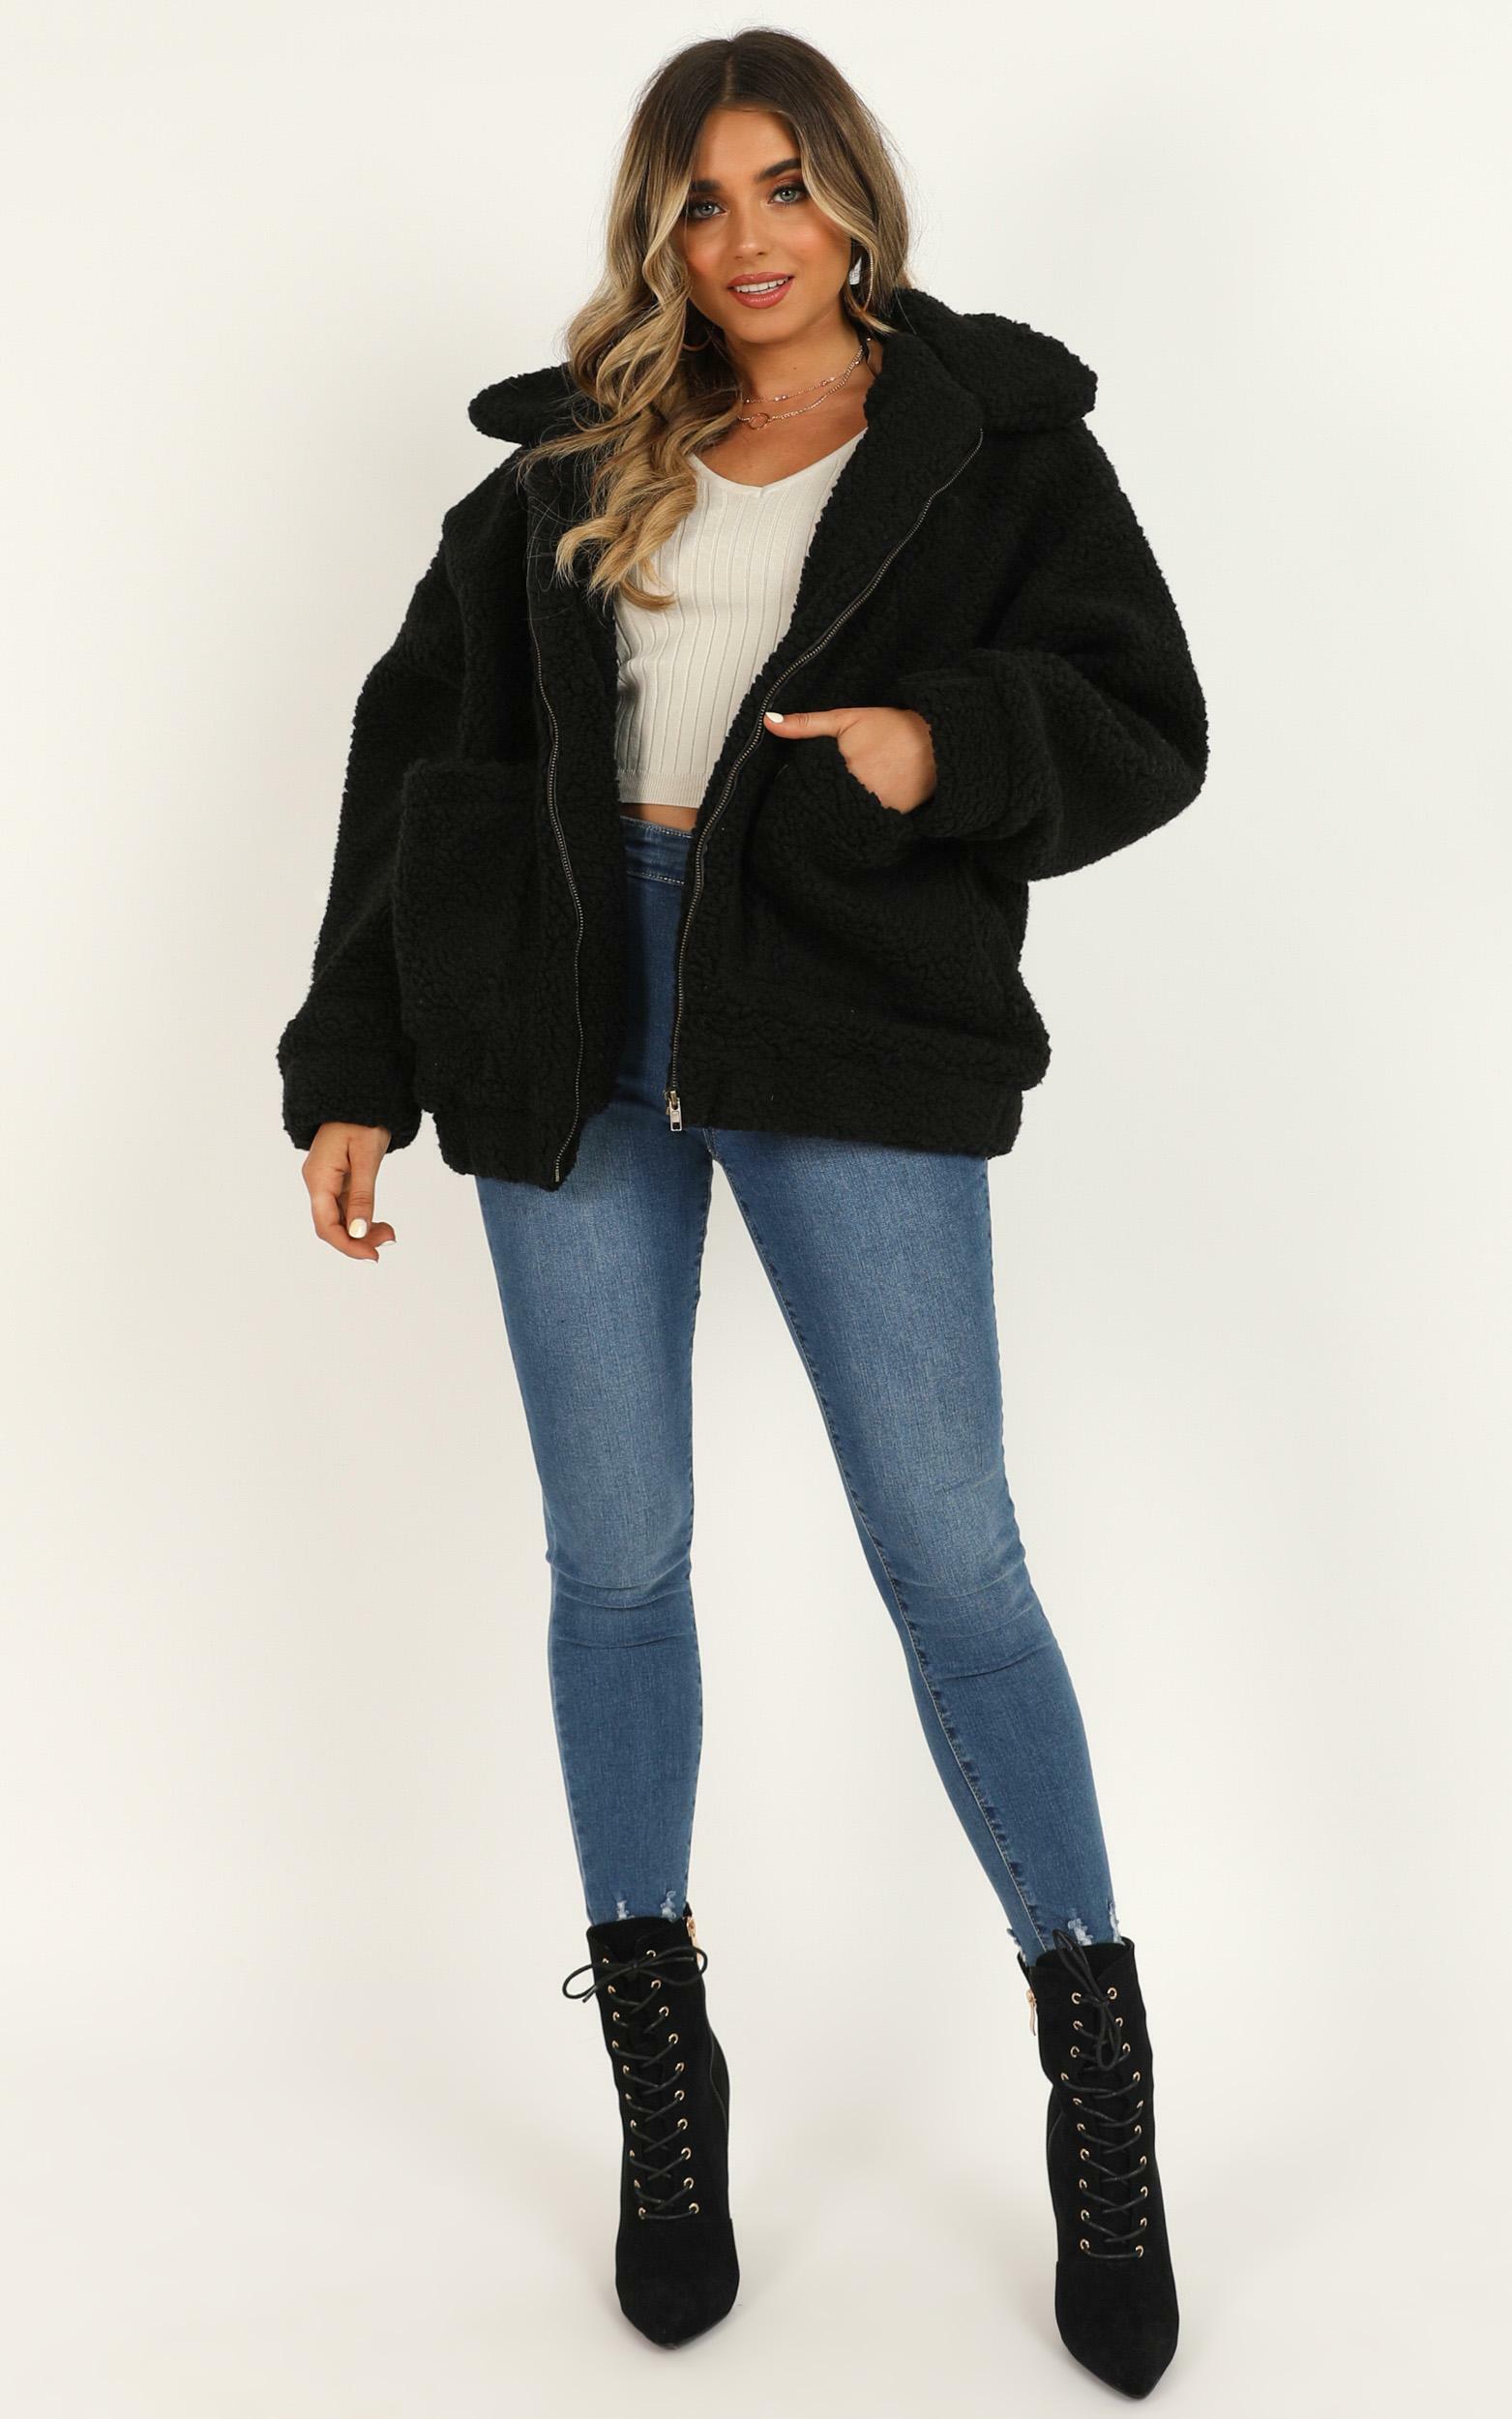 Point Blank Jacket in Black Teddy - OneSize, BLK1, hi-res image number null